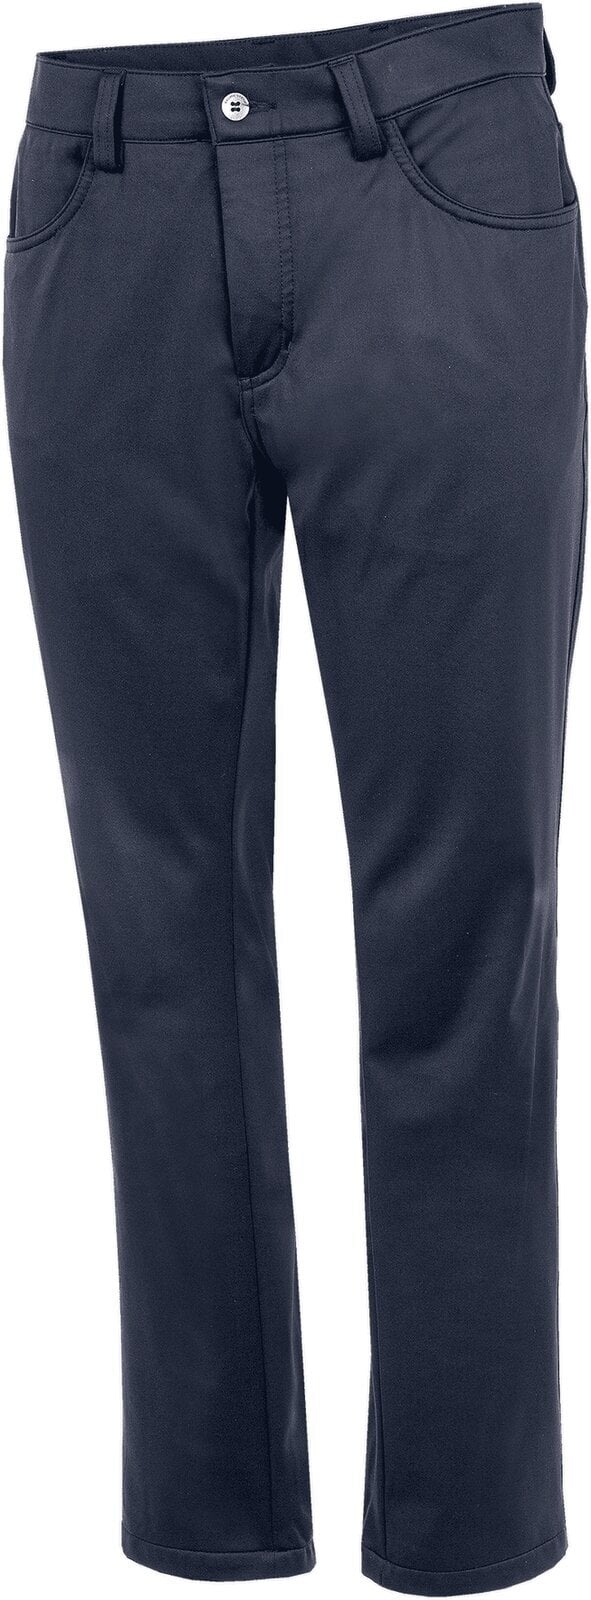 Trousers Galvin Green Lane Windproof And Water Repellent Navy 34/32 Trousers